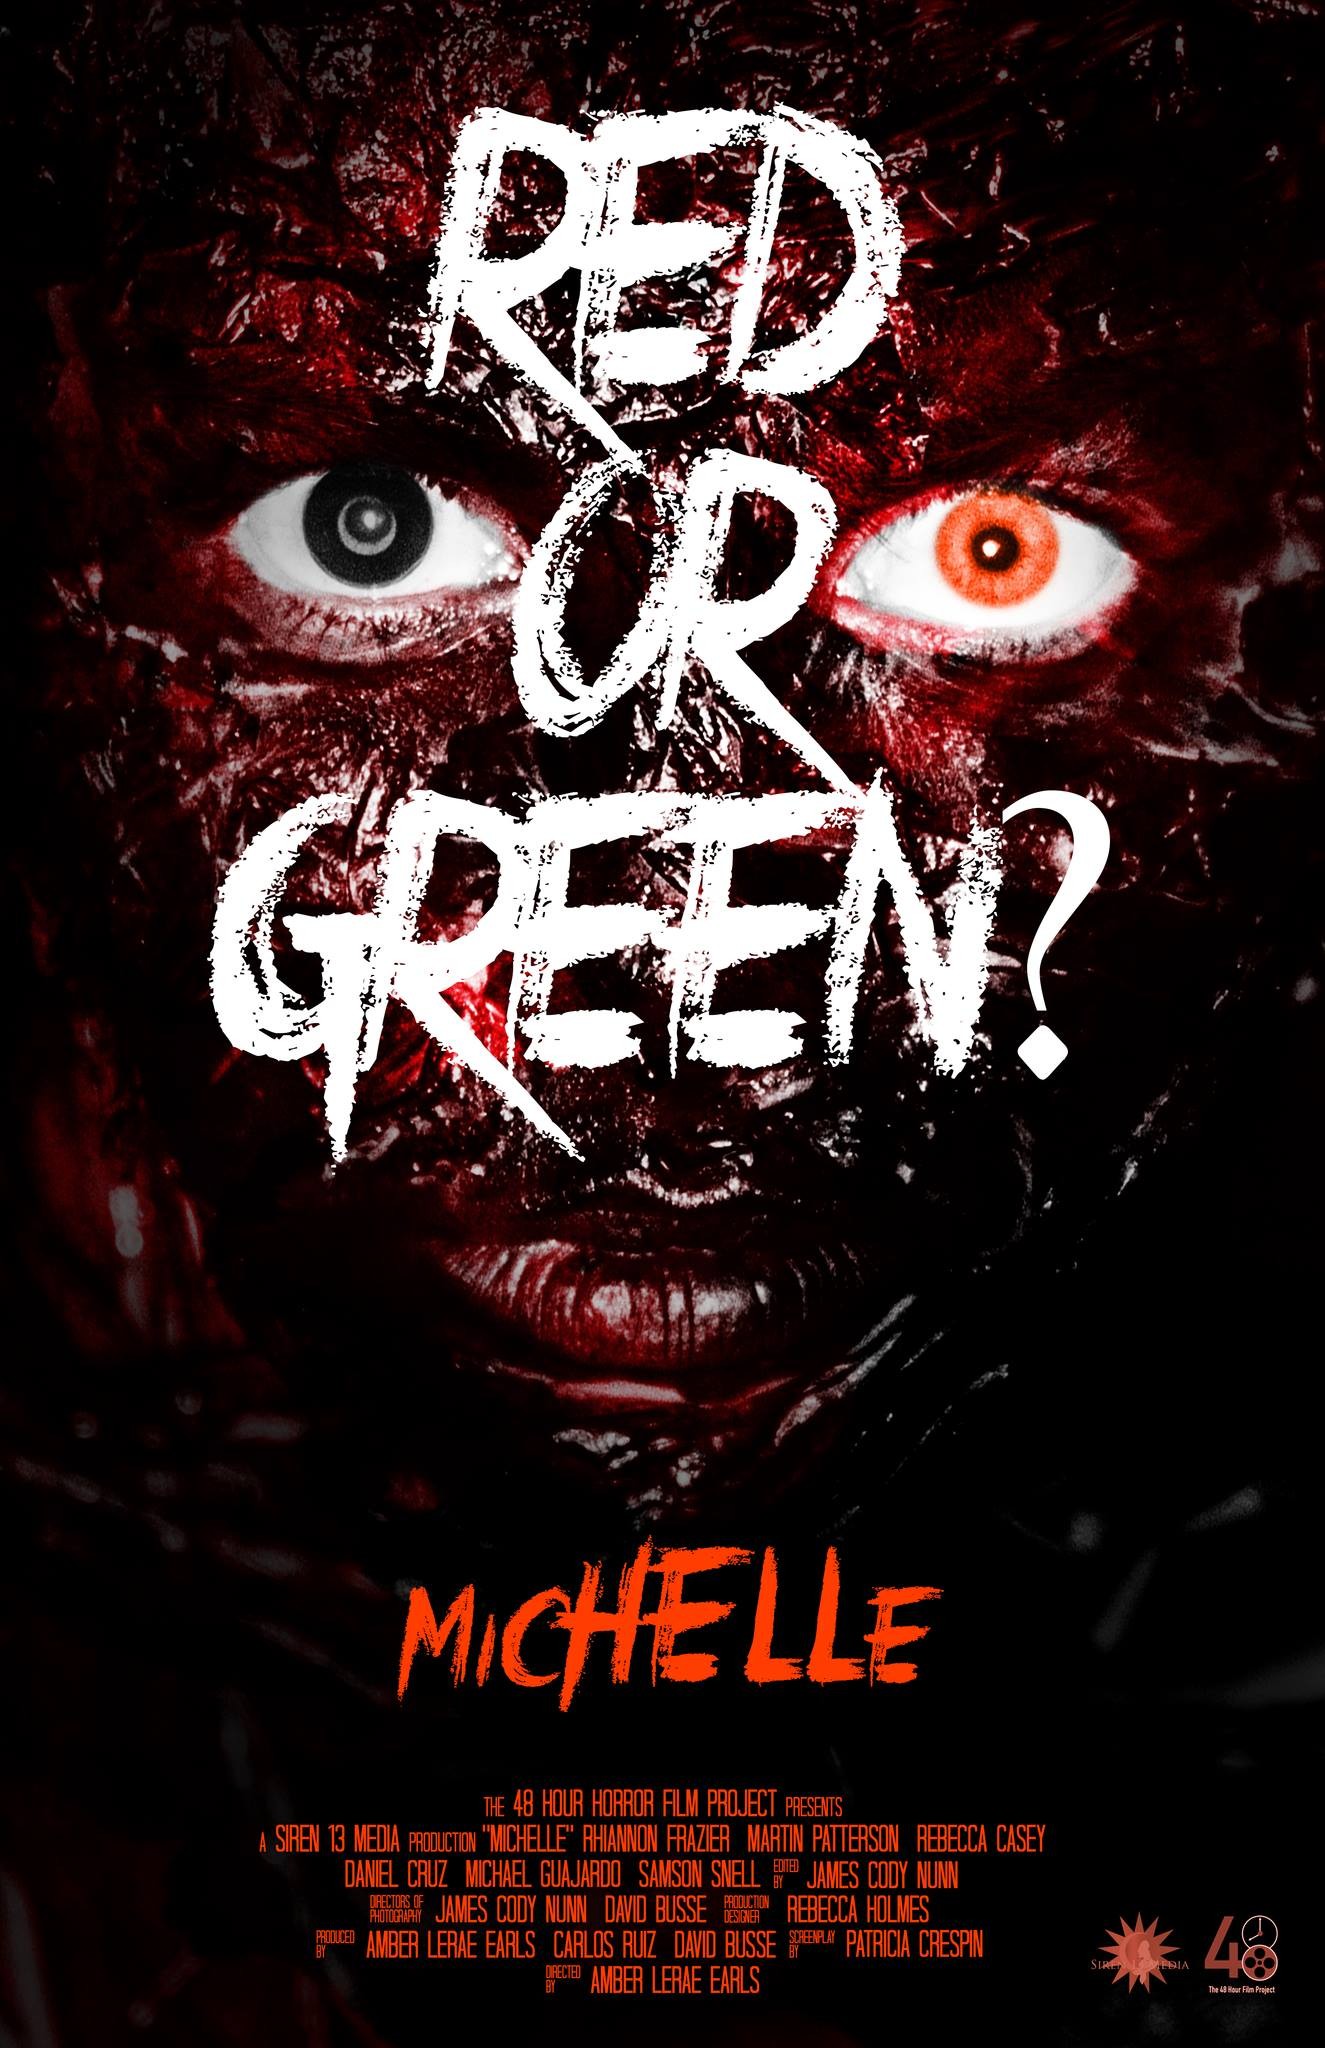 Mega Sized Movie Poster Image for Michelle